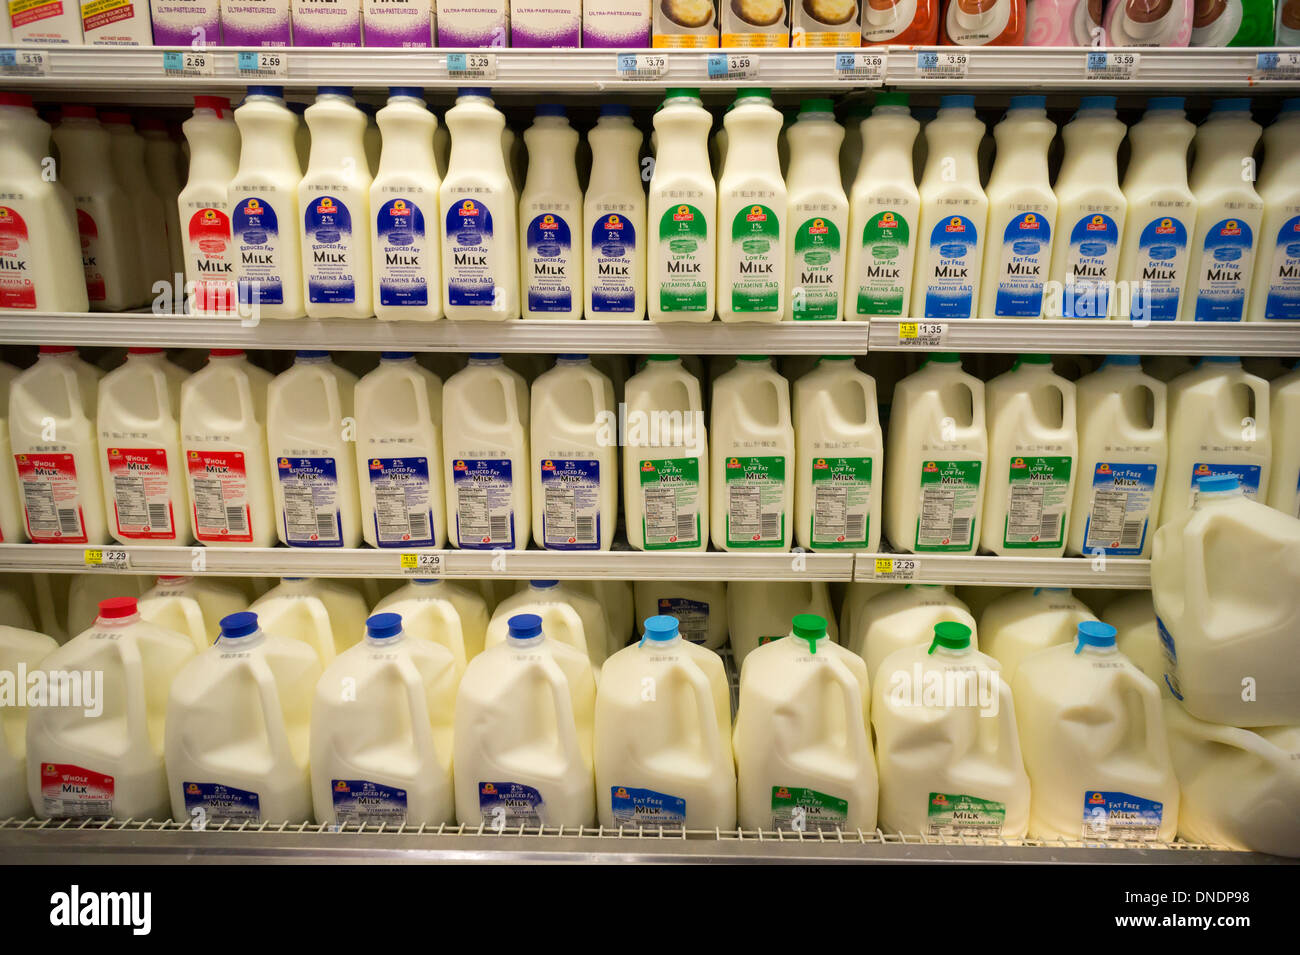 https://c8.alamy.com/comp/DNDP98/containers-of-milk-in-a-supermarket-refrigerator-in-new-york-DNDP98.jpg